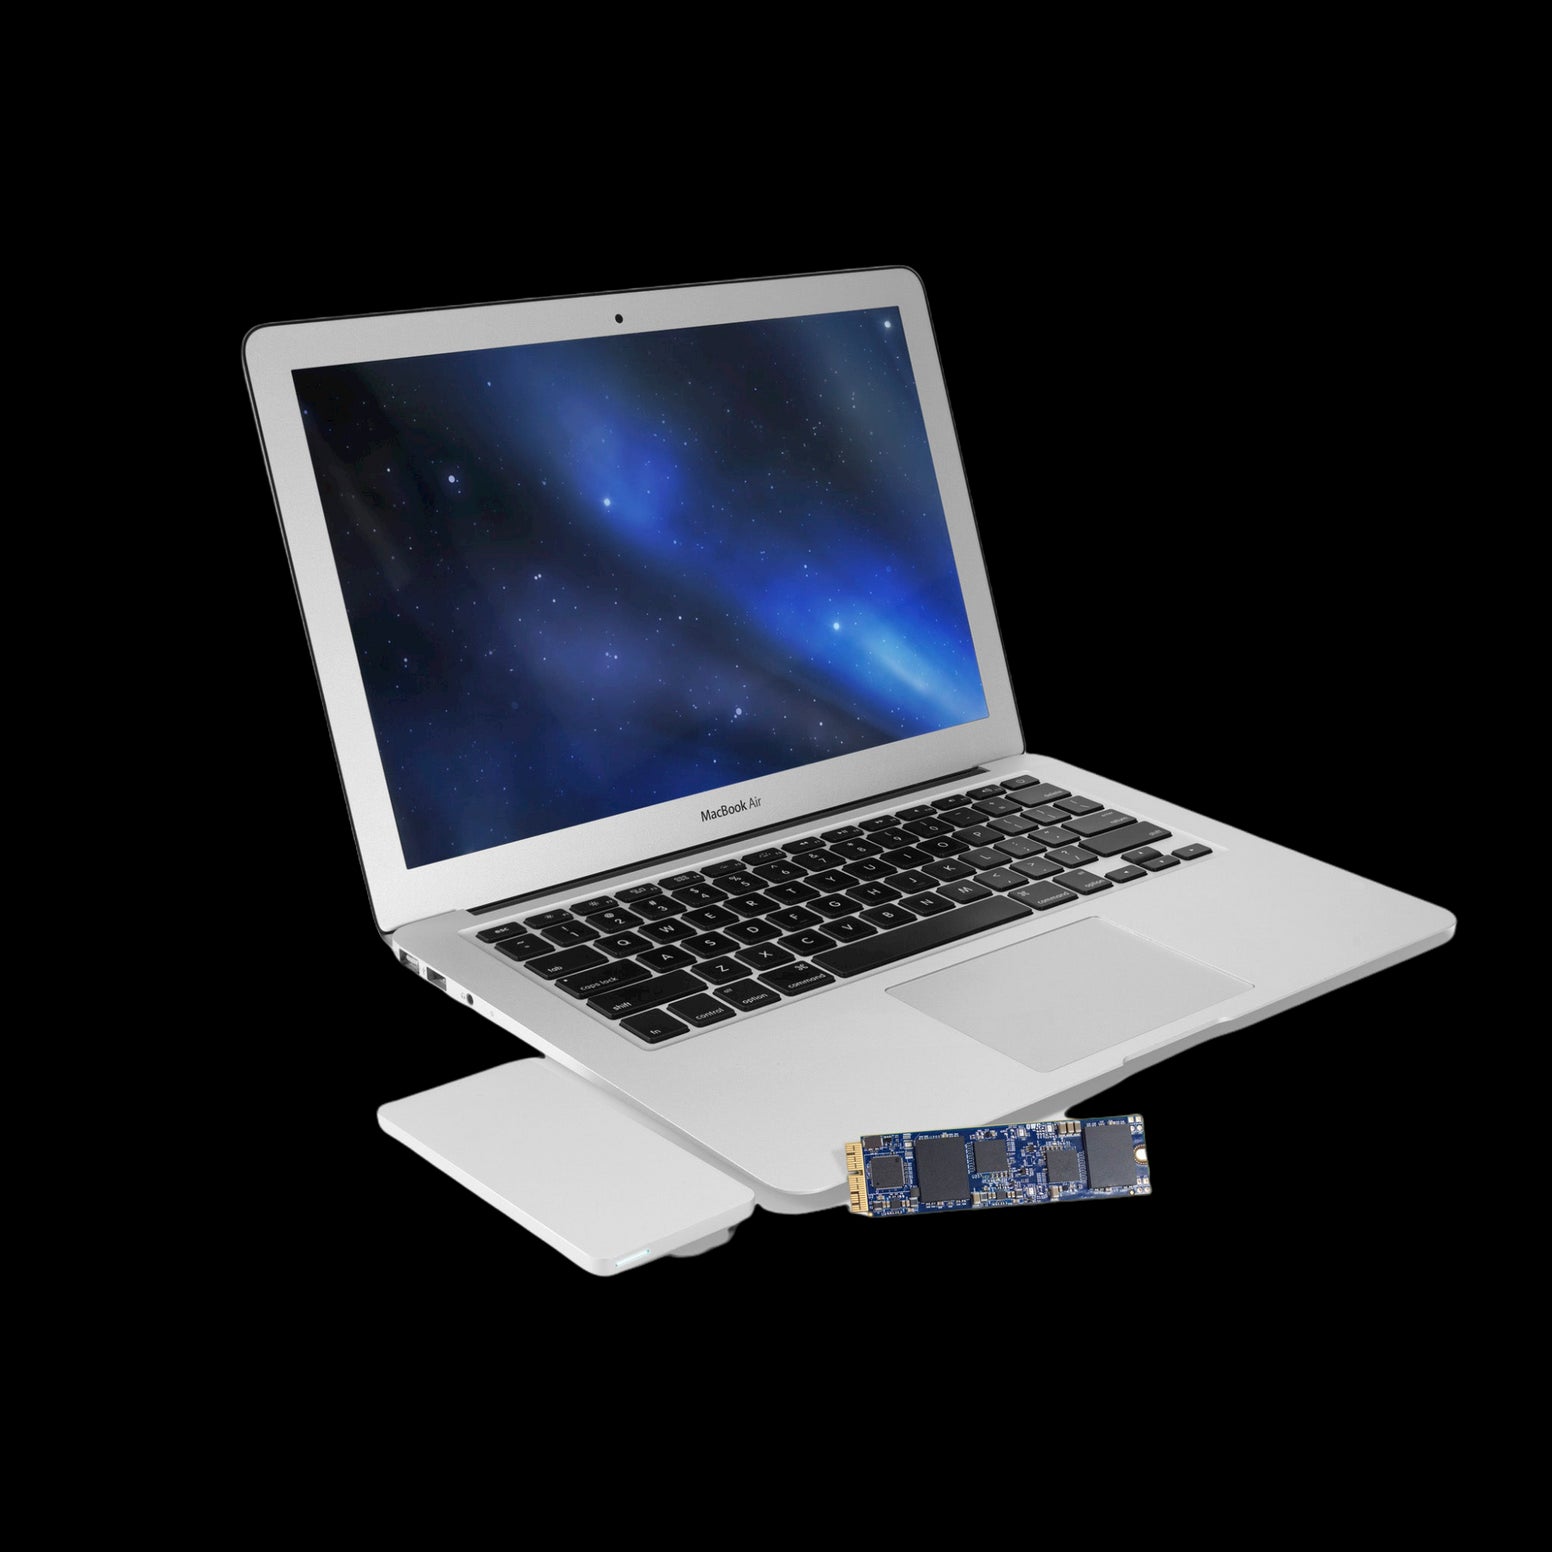 OWC 500GB Aura Pro 6G SSD with Upgrade Kit for MacBook 2012 Air - Discontinued